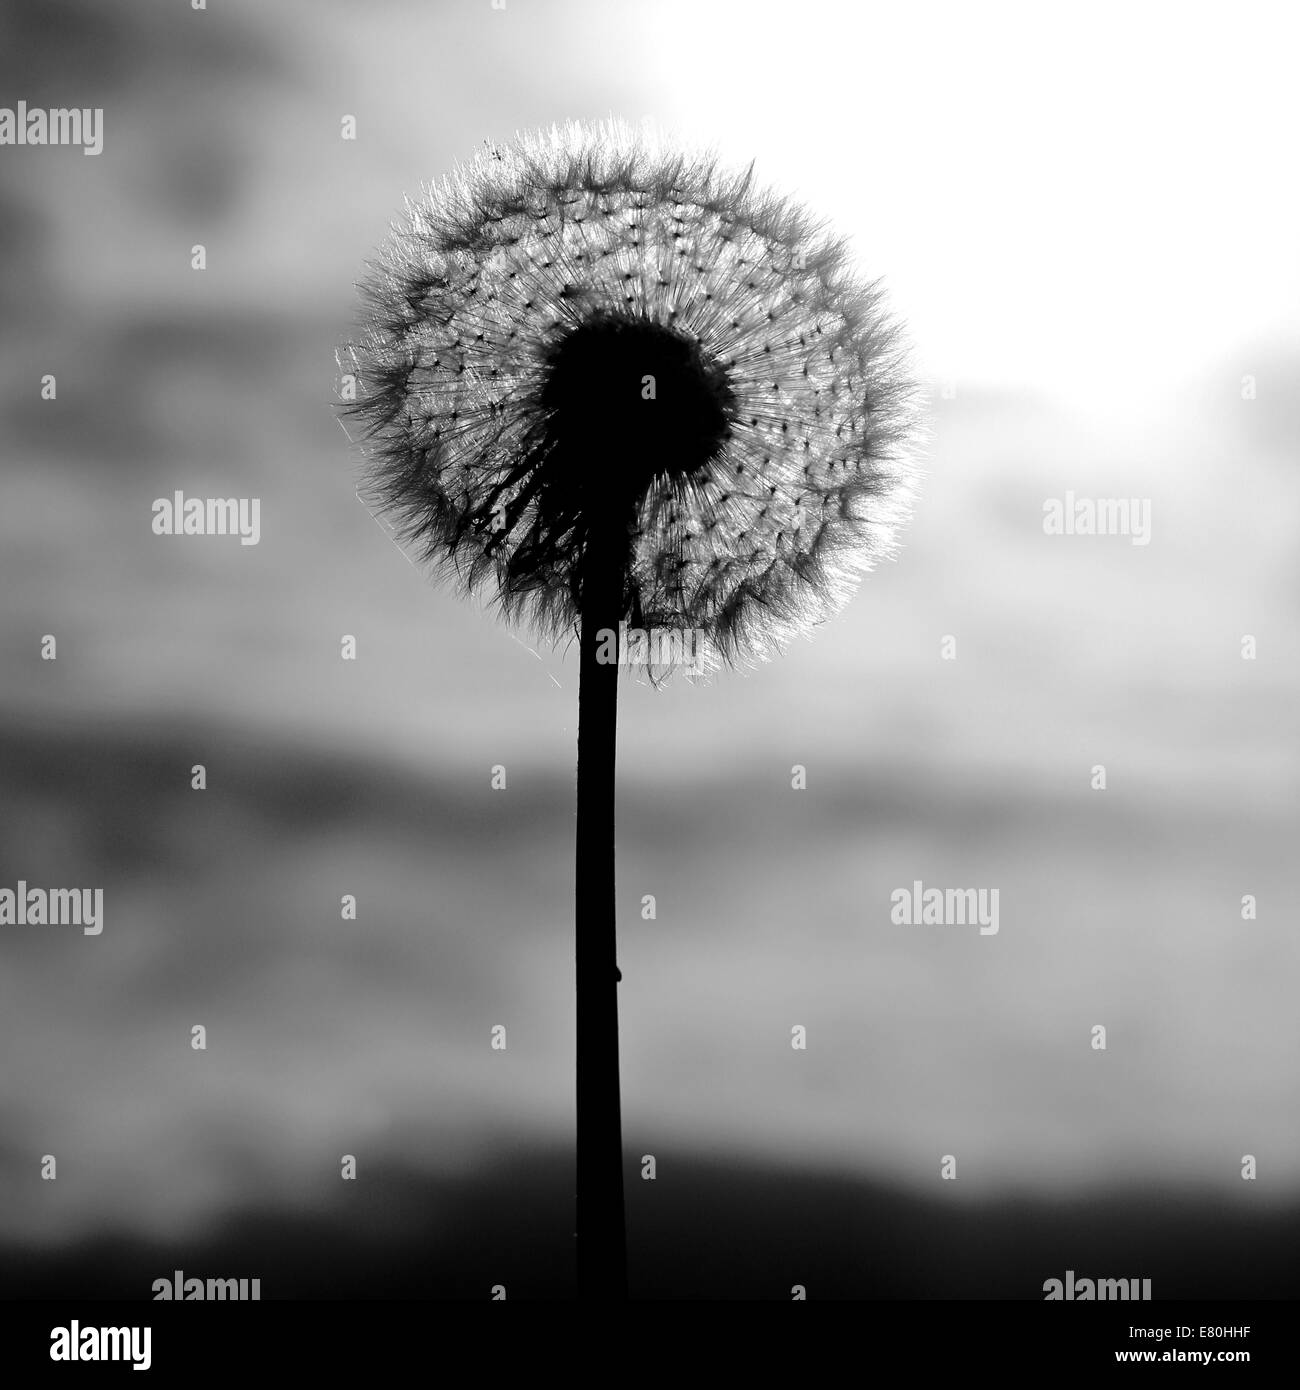 Dramatic black and white Autumn image of a dandelion wild flower after flowering displaying a full seed head Stock Photo